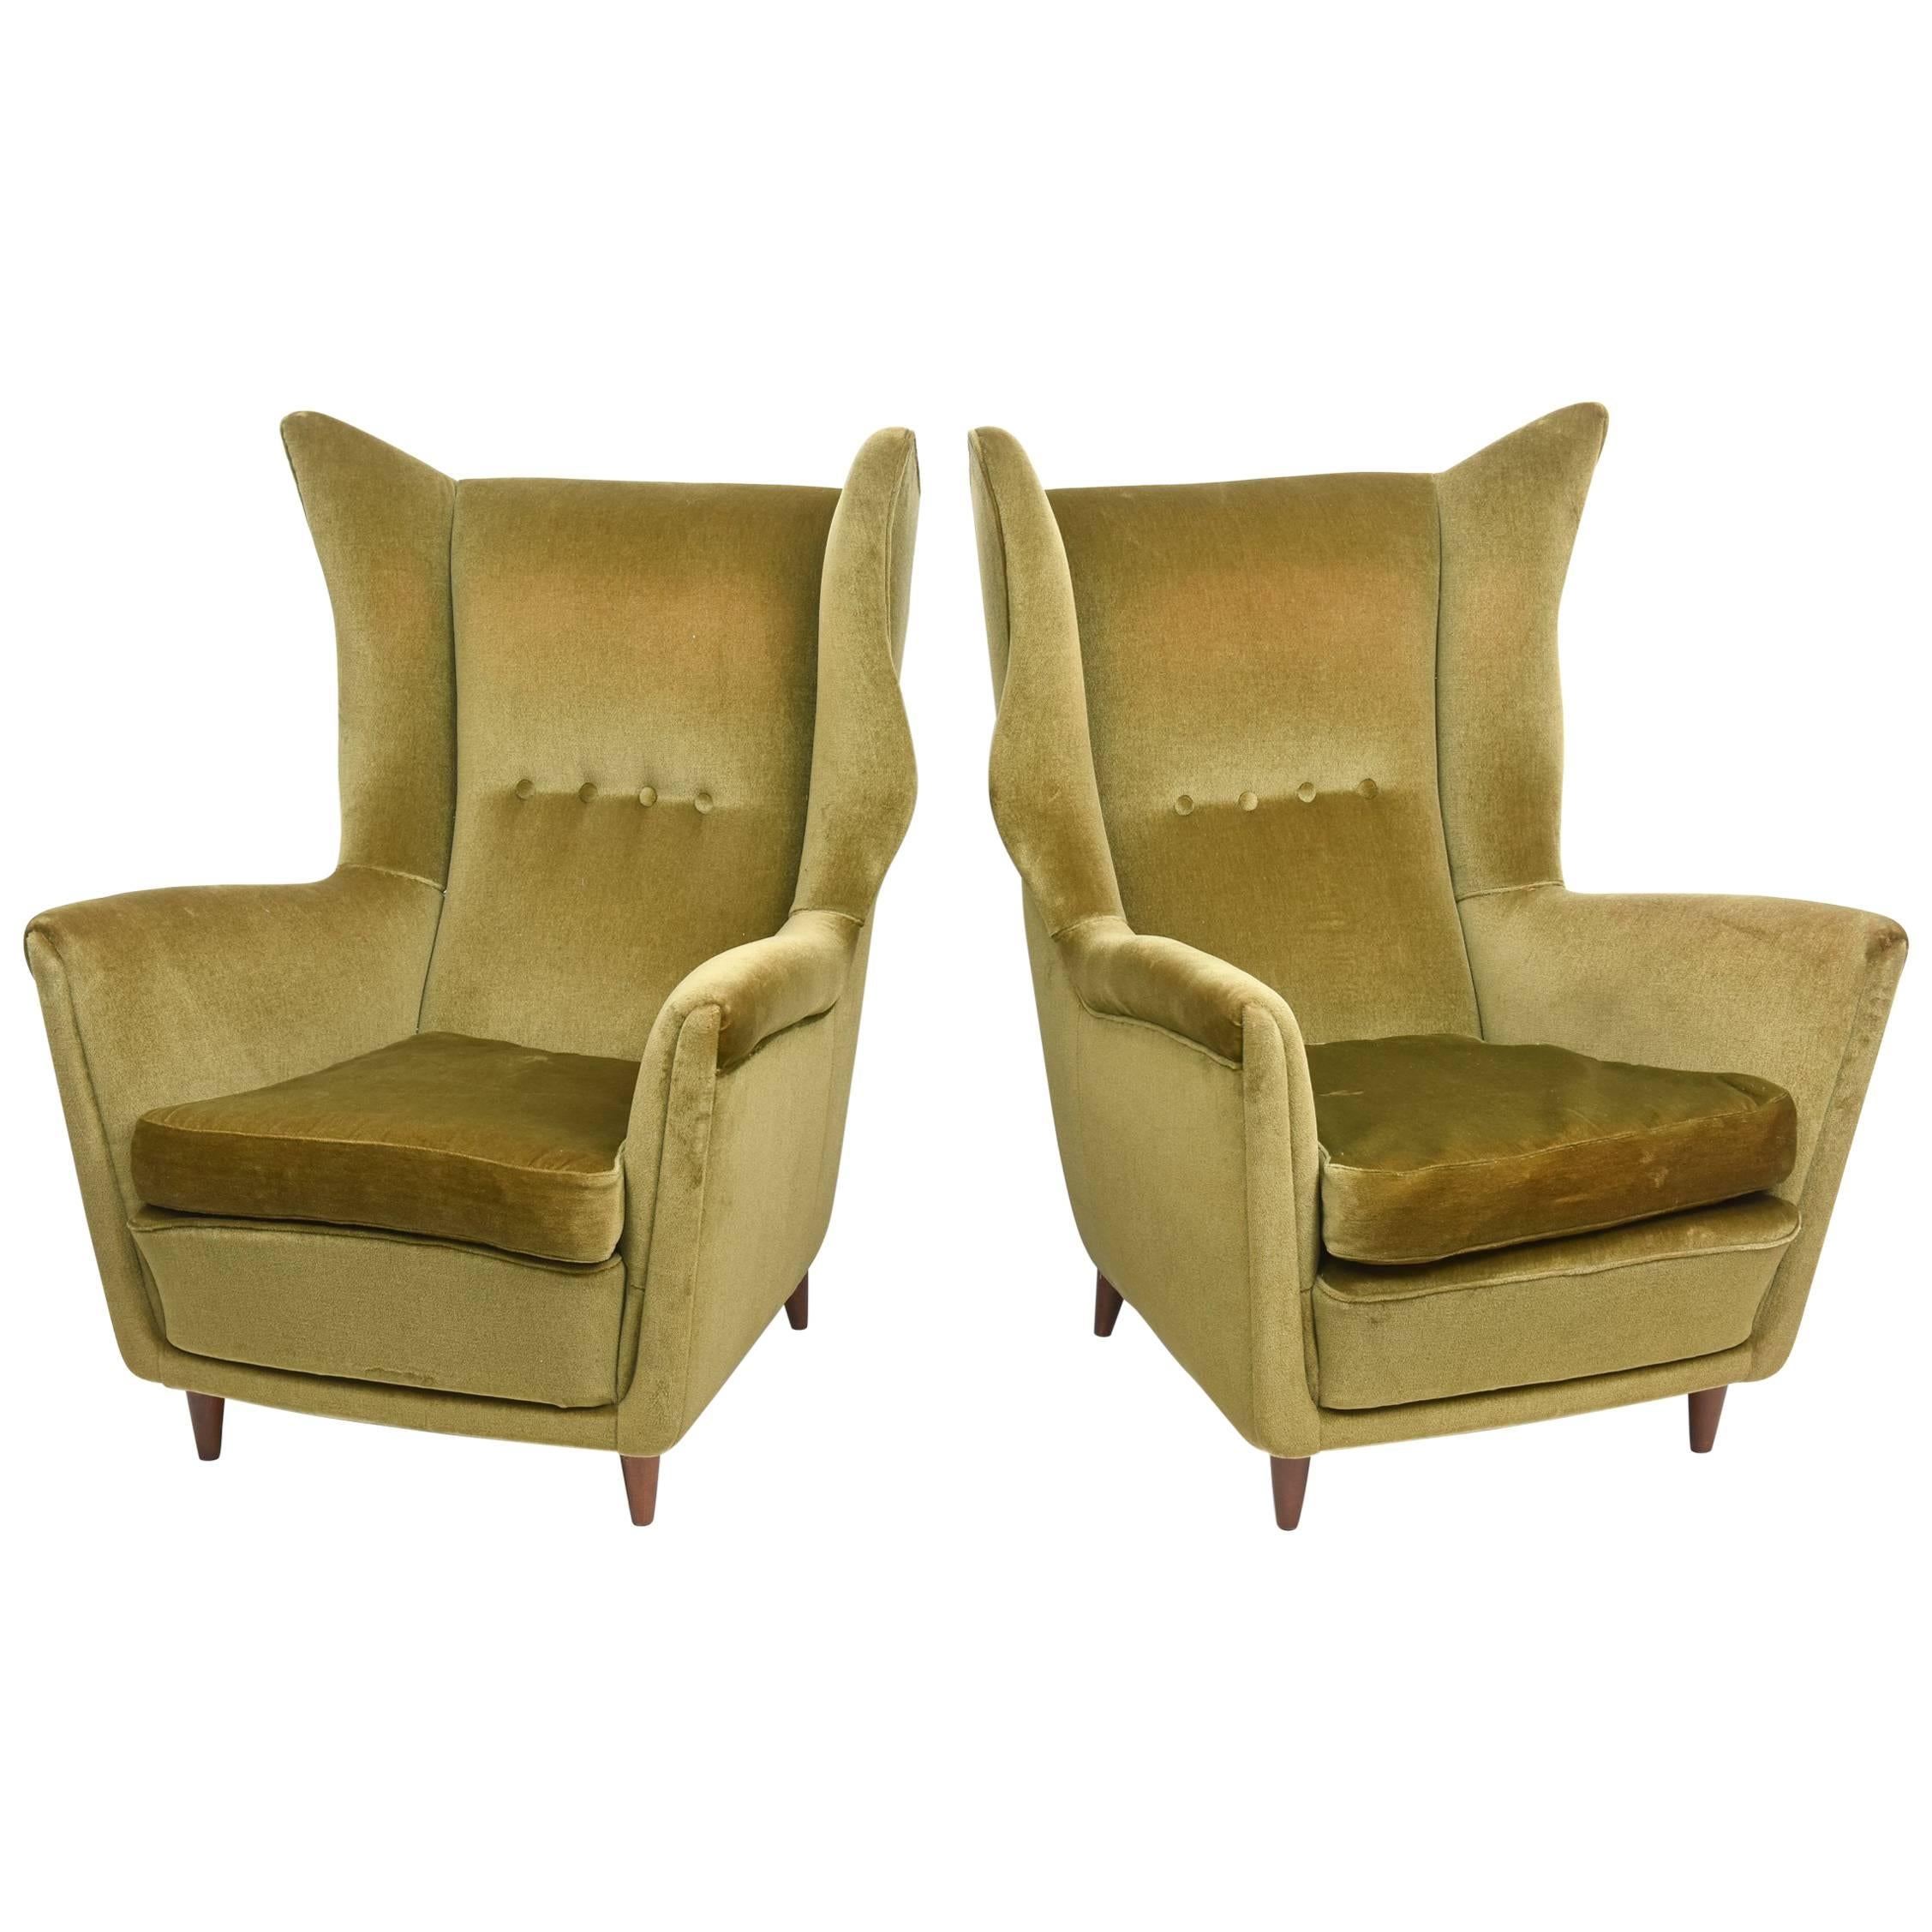 Large and Imposing Pair of Italian Modern Lounge Chairs in Gio Ponti Style For Sale